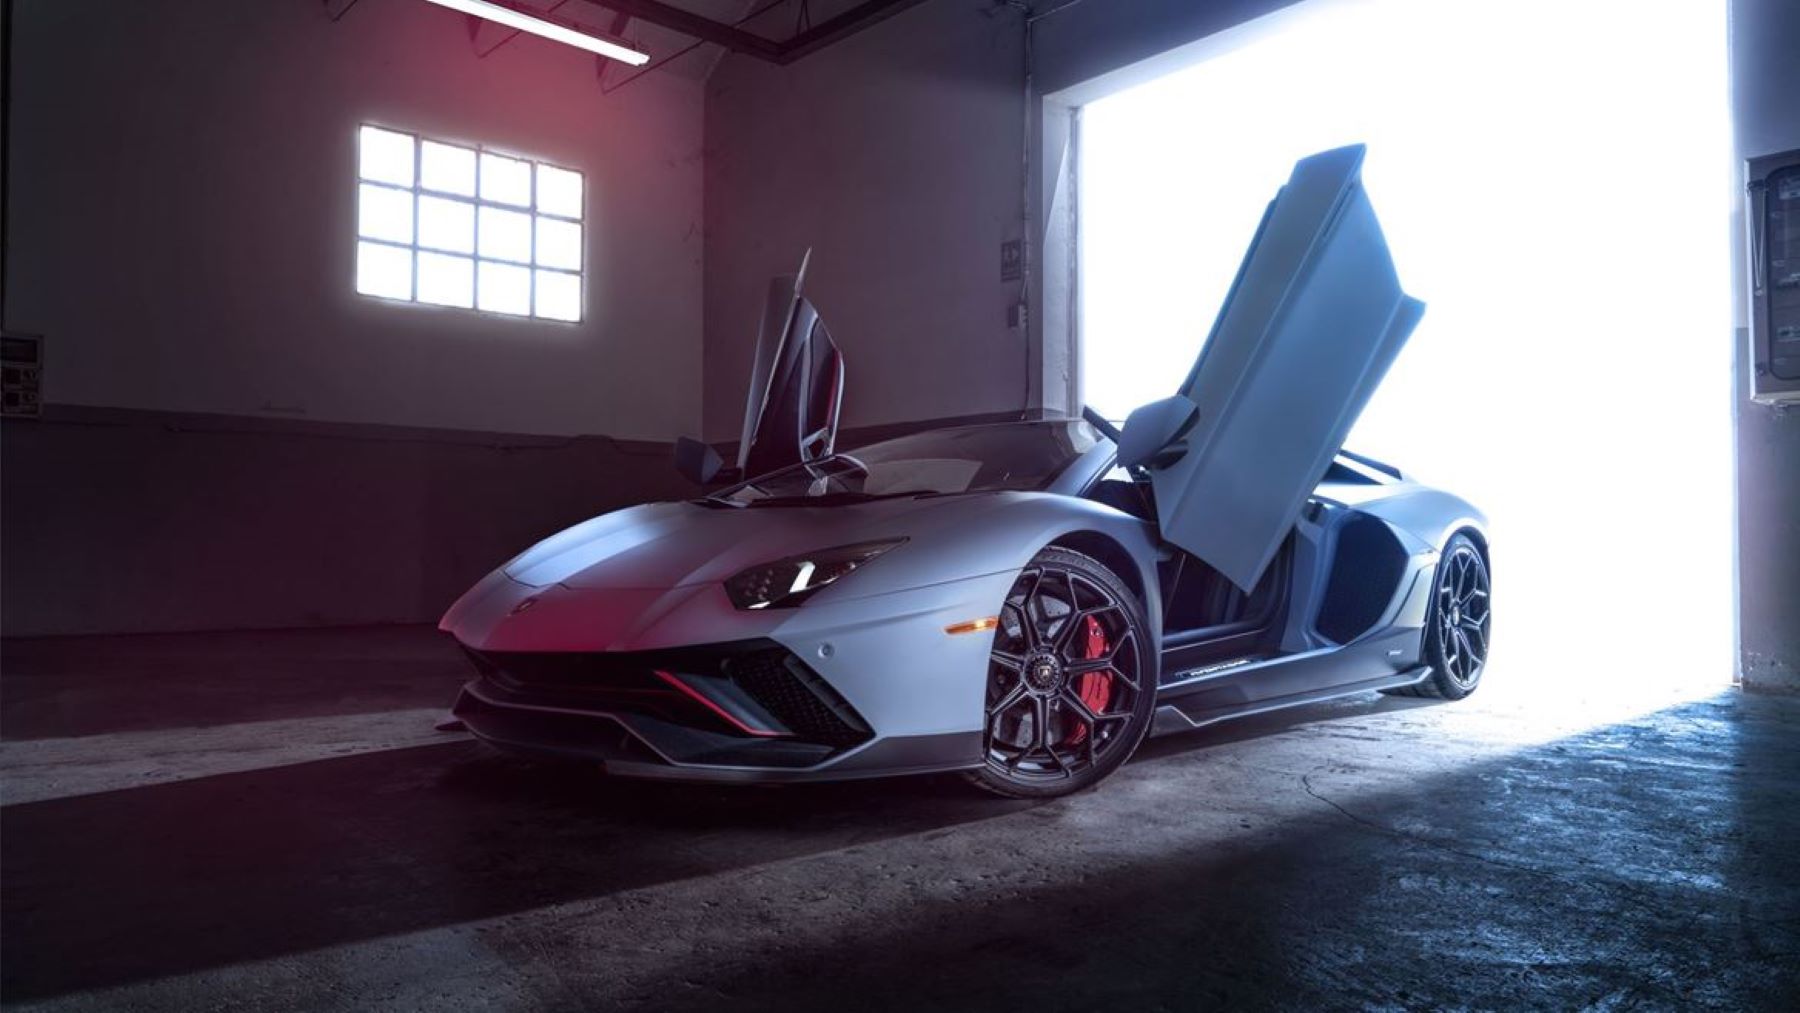 The Lamborghini Aventador Ultimae Ambient LP 780-4 with its doors open and bathed in light from outside its garage